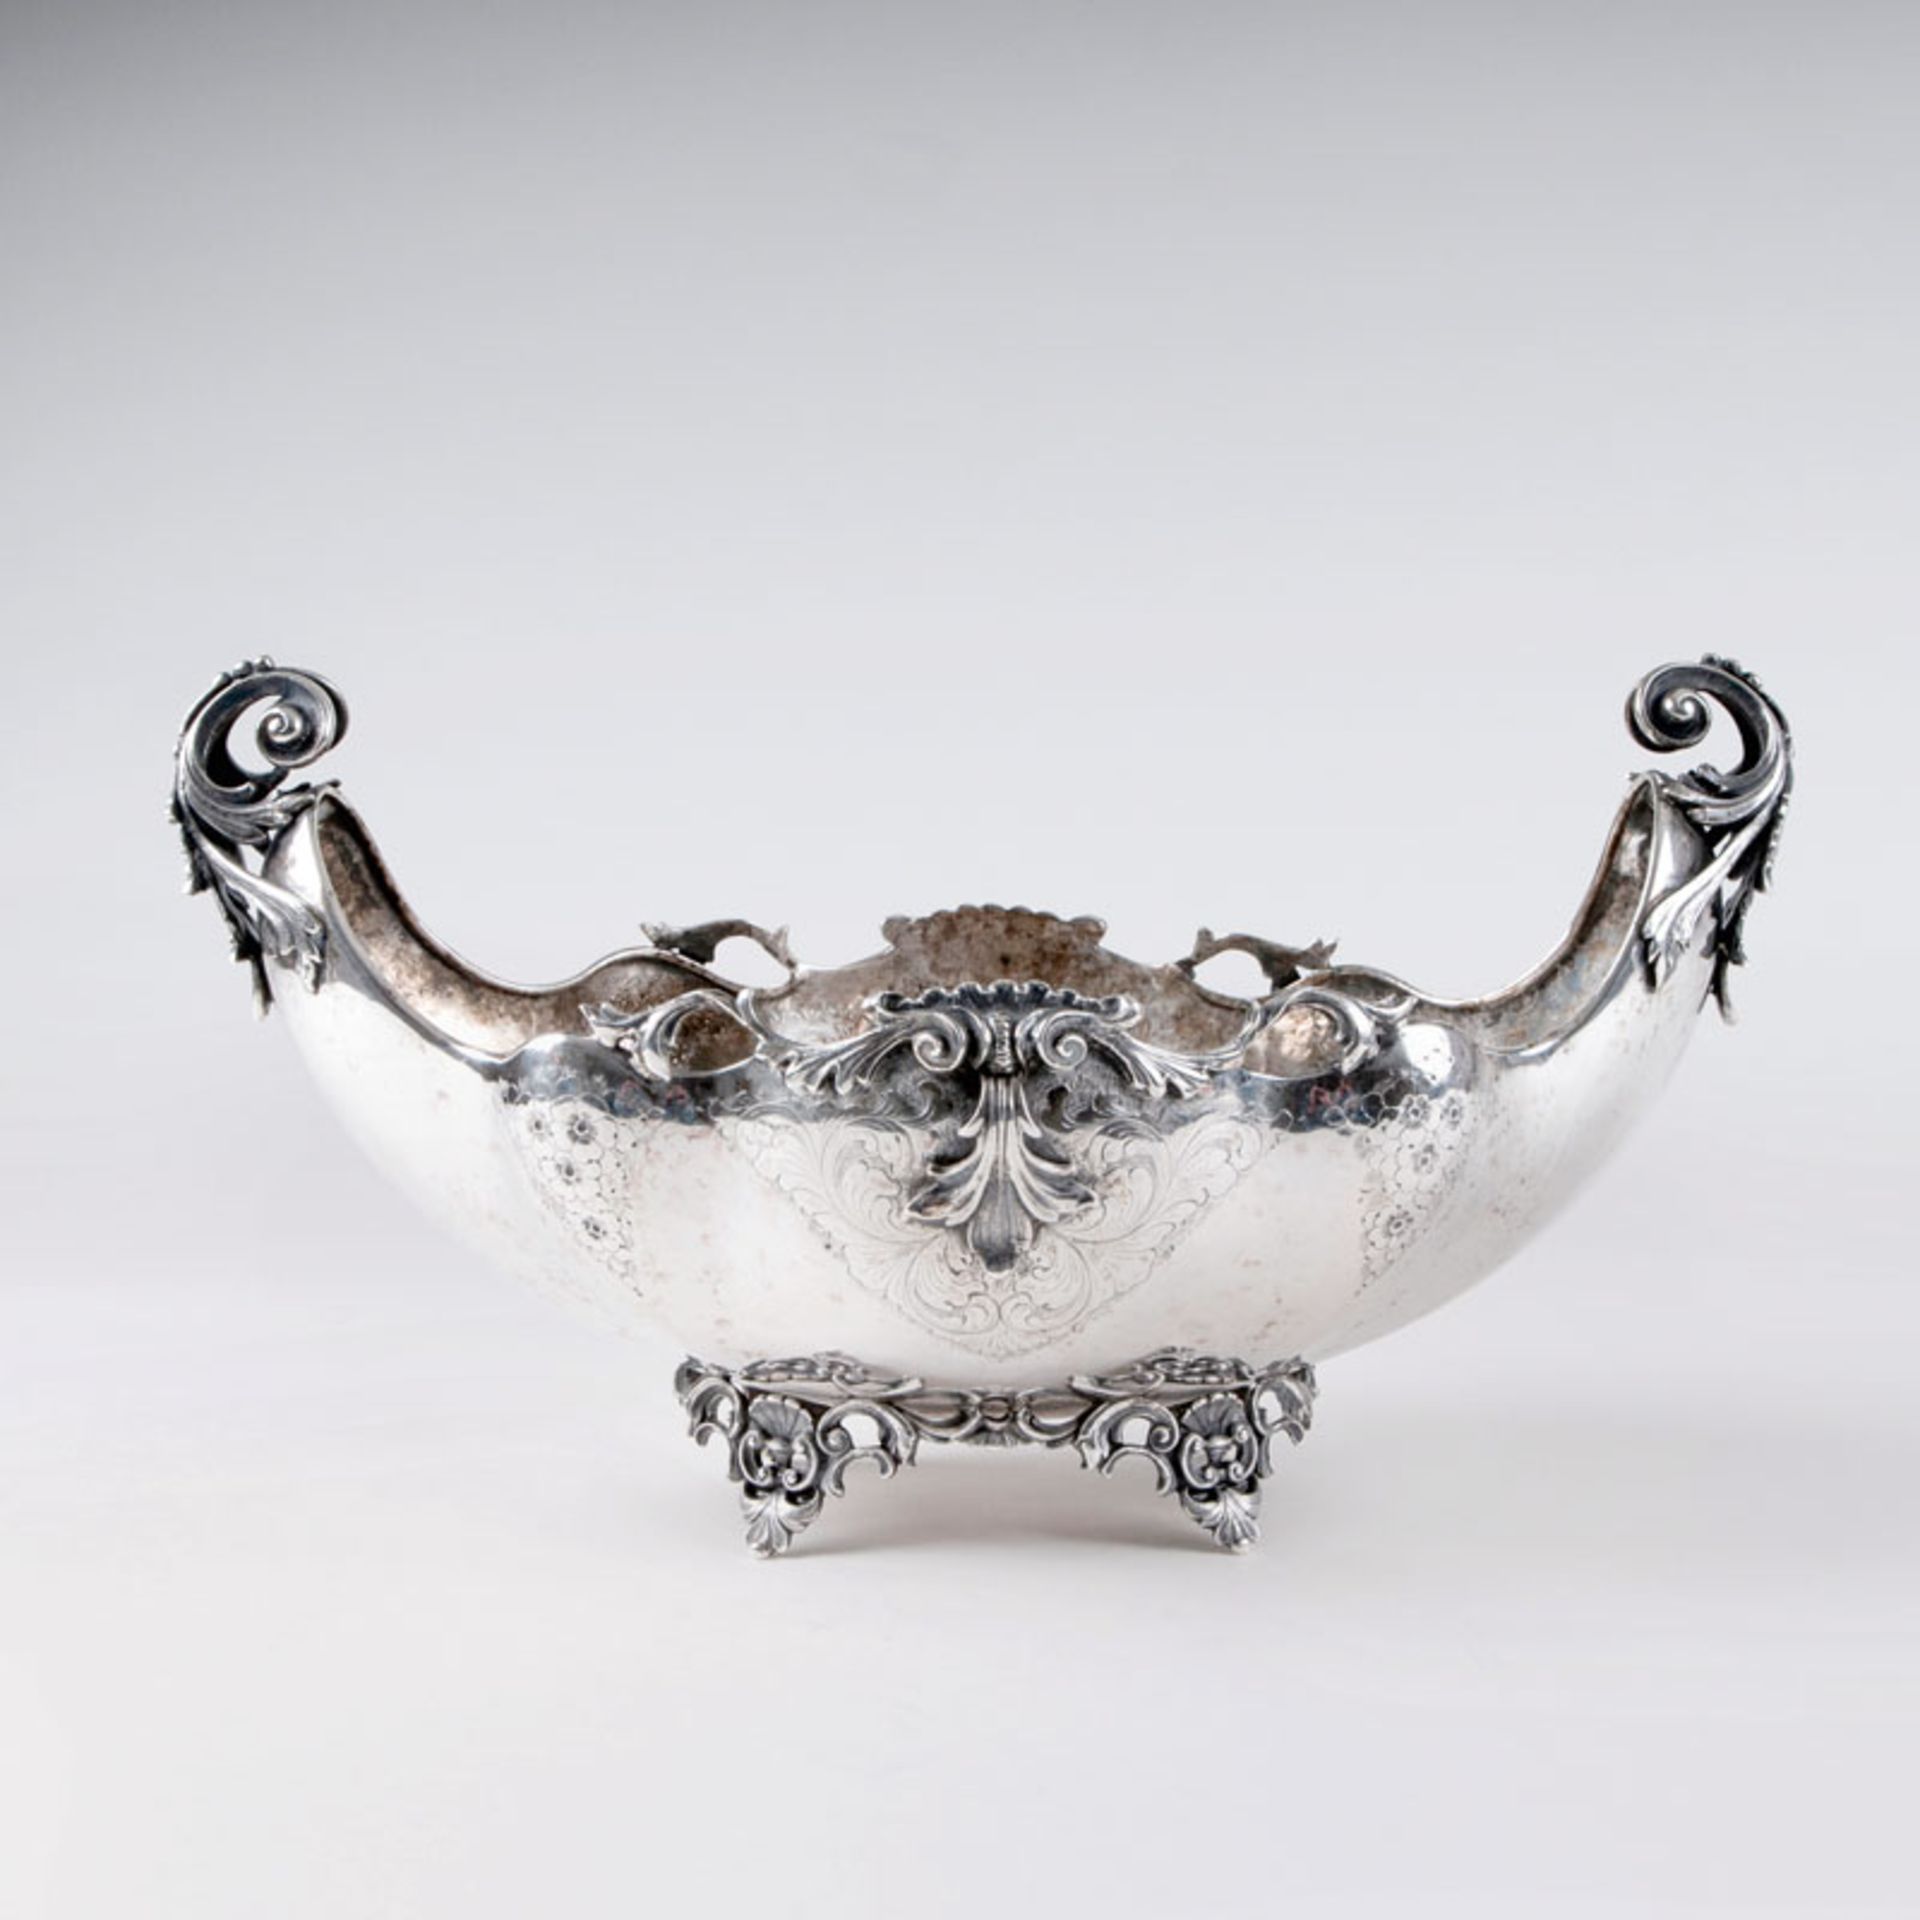 A jardinière of Rococo style Germany, end of 19th cent. Silver, stamped indistinct, '800'. Richly